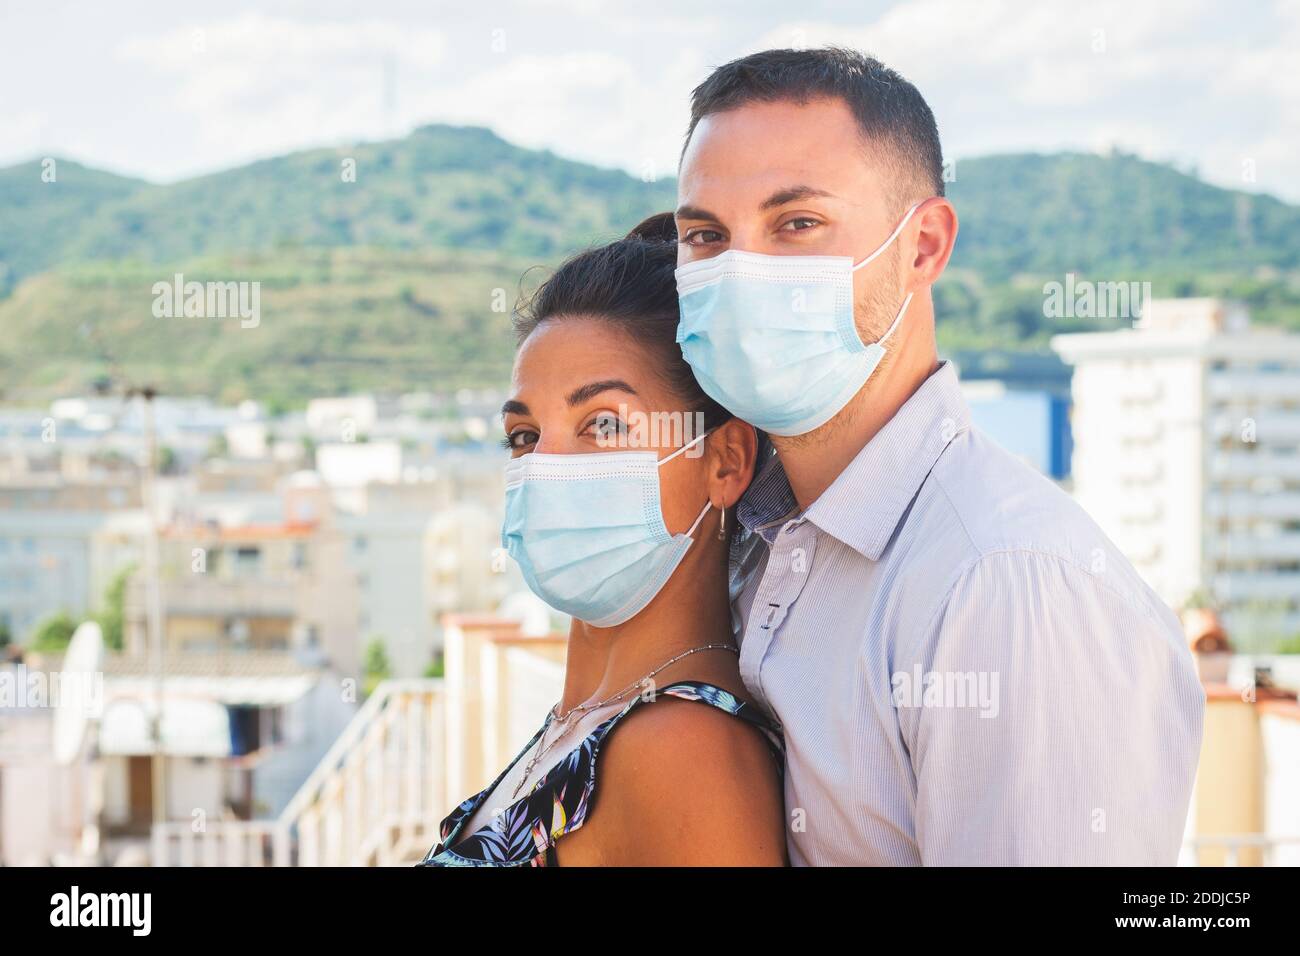 Portrait of a man next to a woman with coronavirus protection masks Stock Photo